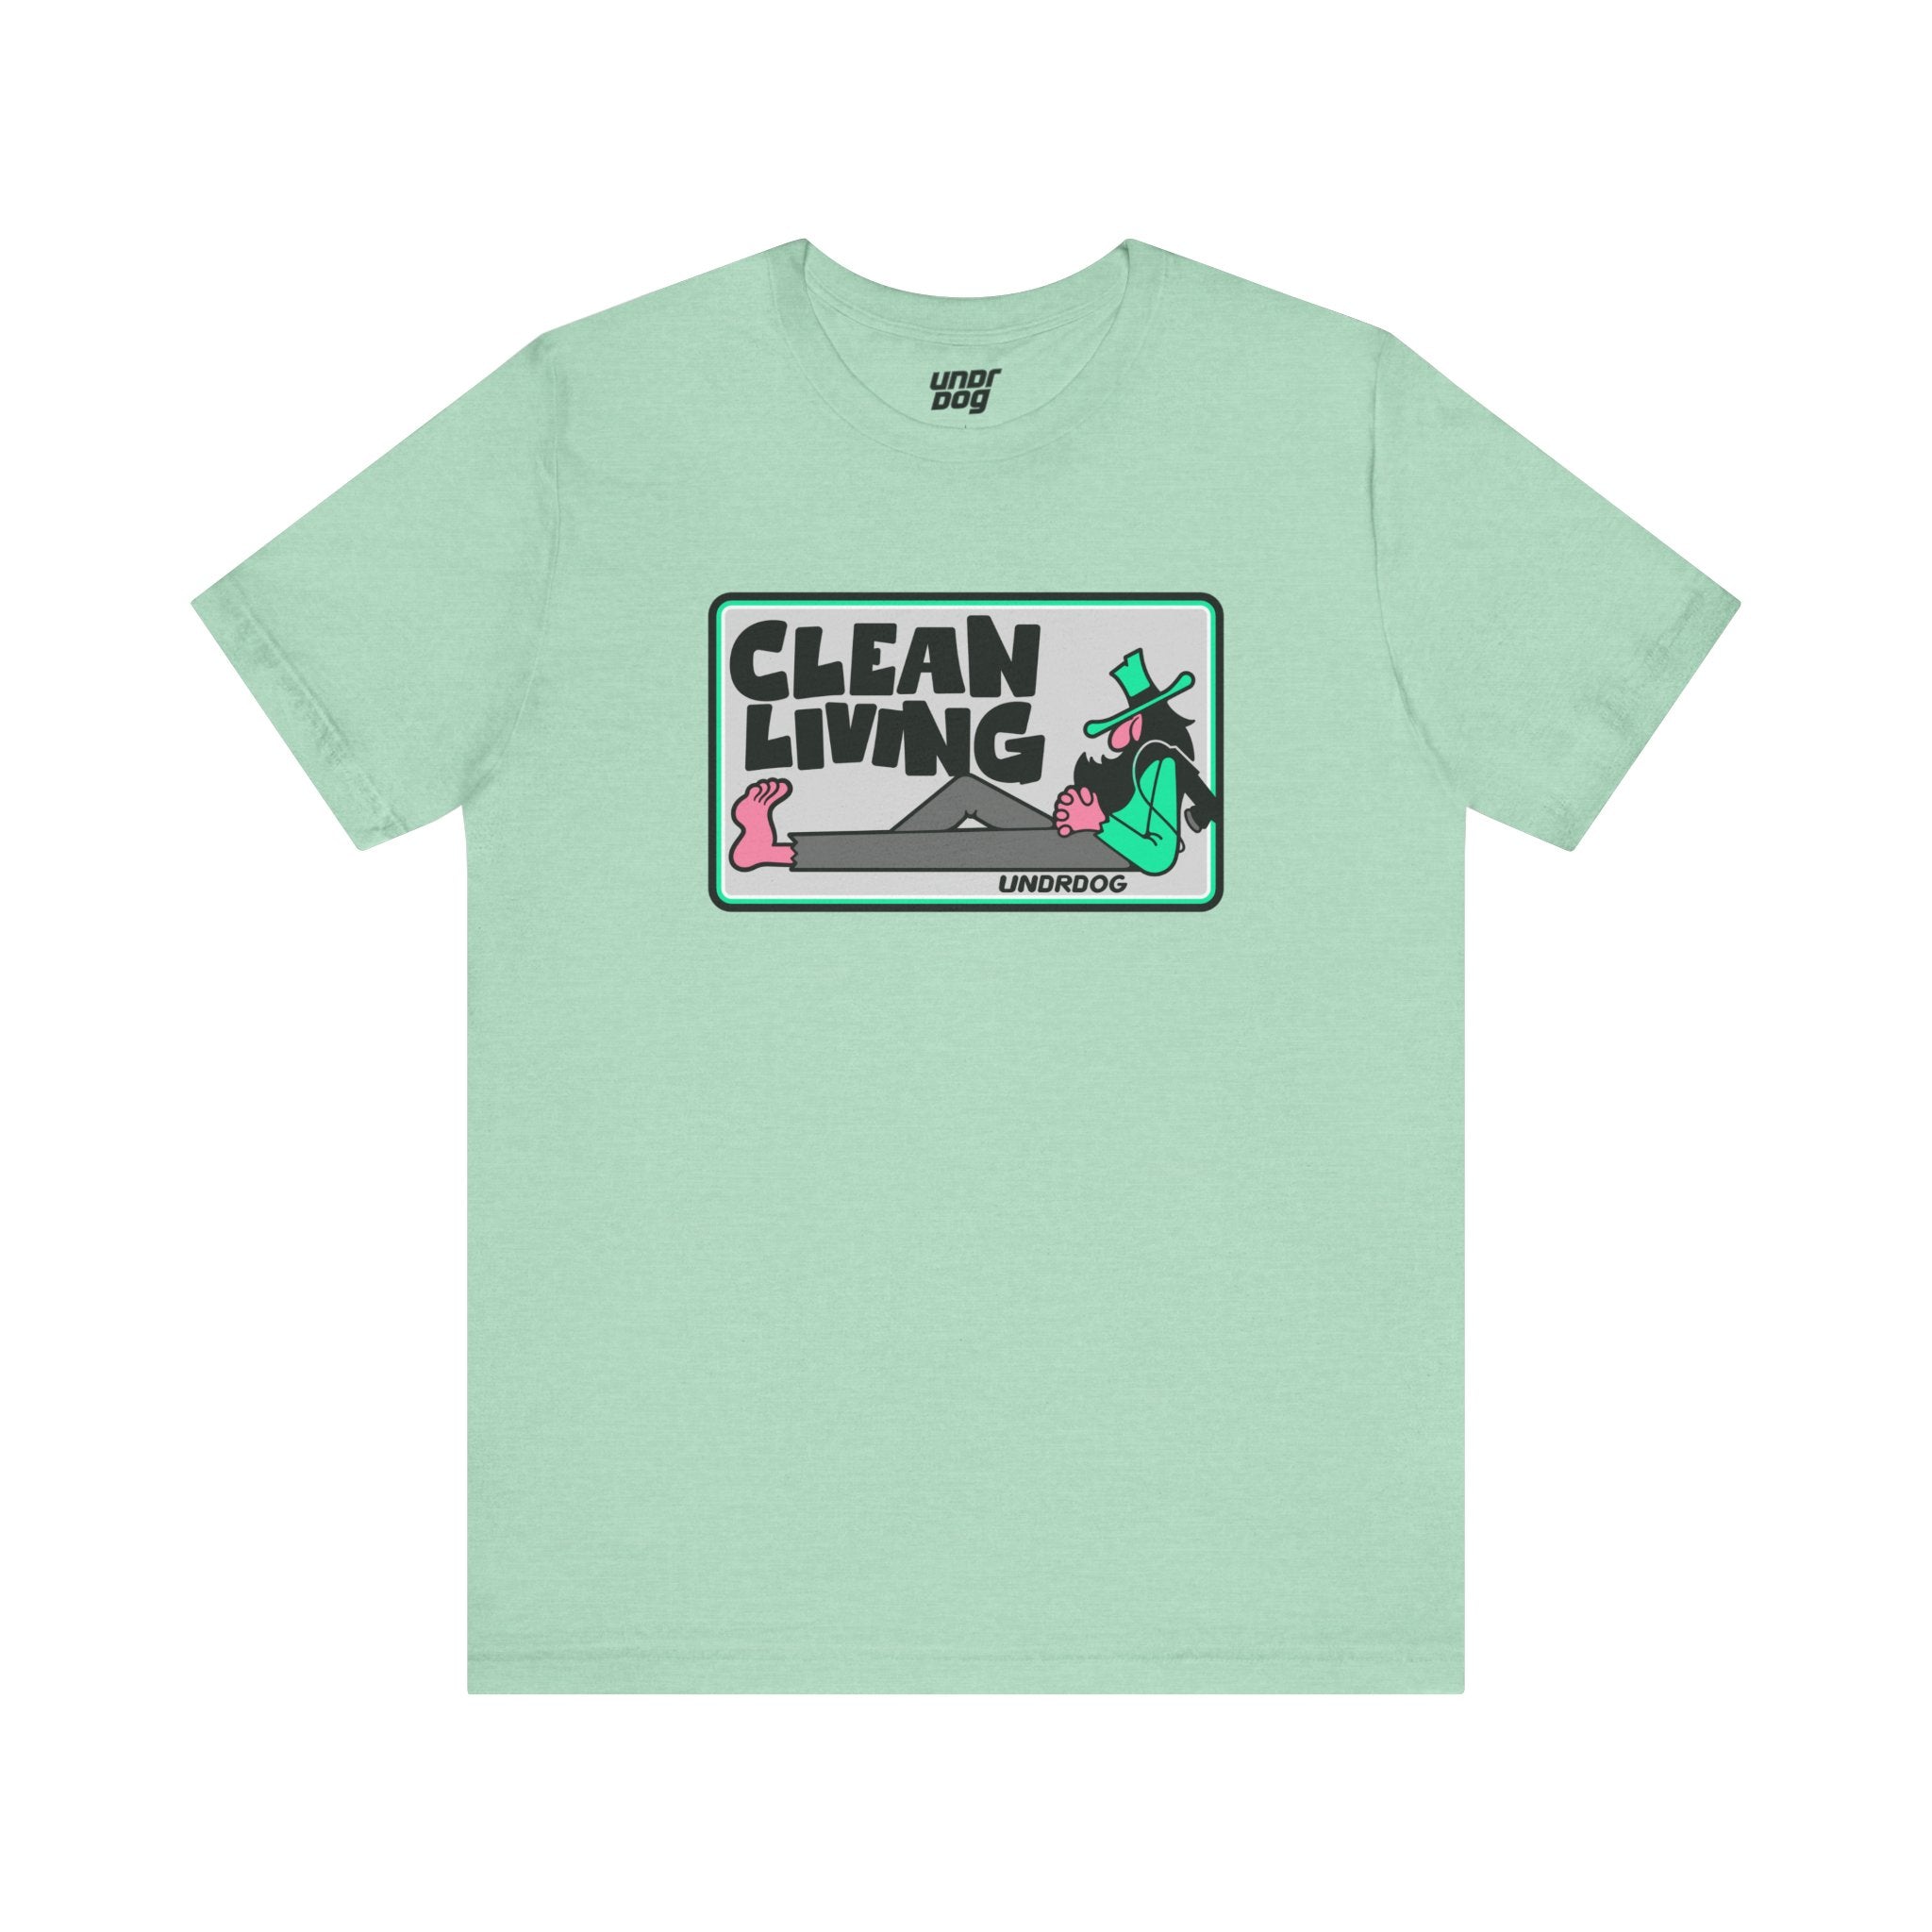 1849309692332601743_2048.jpg - Clean Living v2 by Undrdog Tee - Undrdog Surface Products